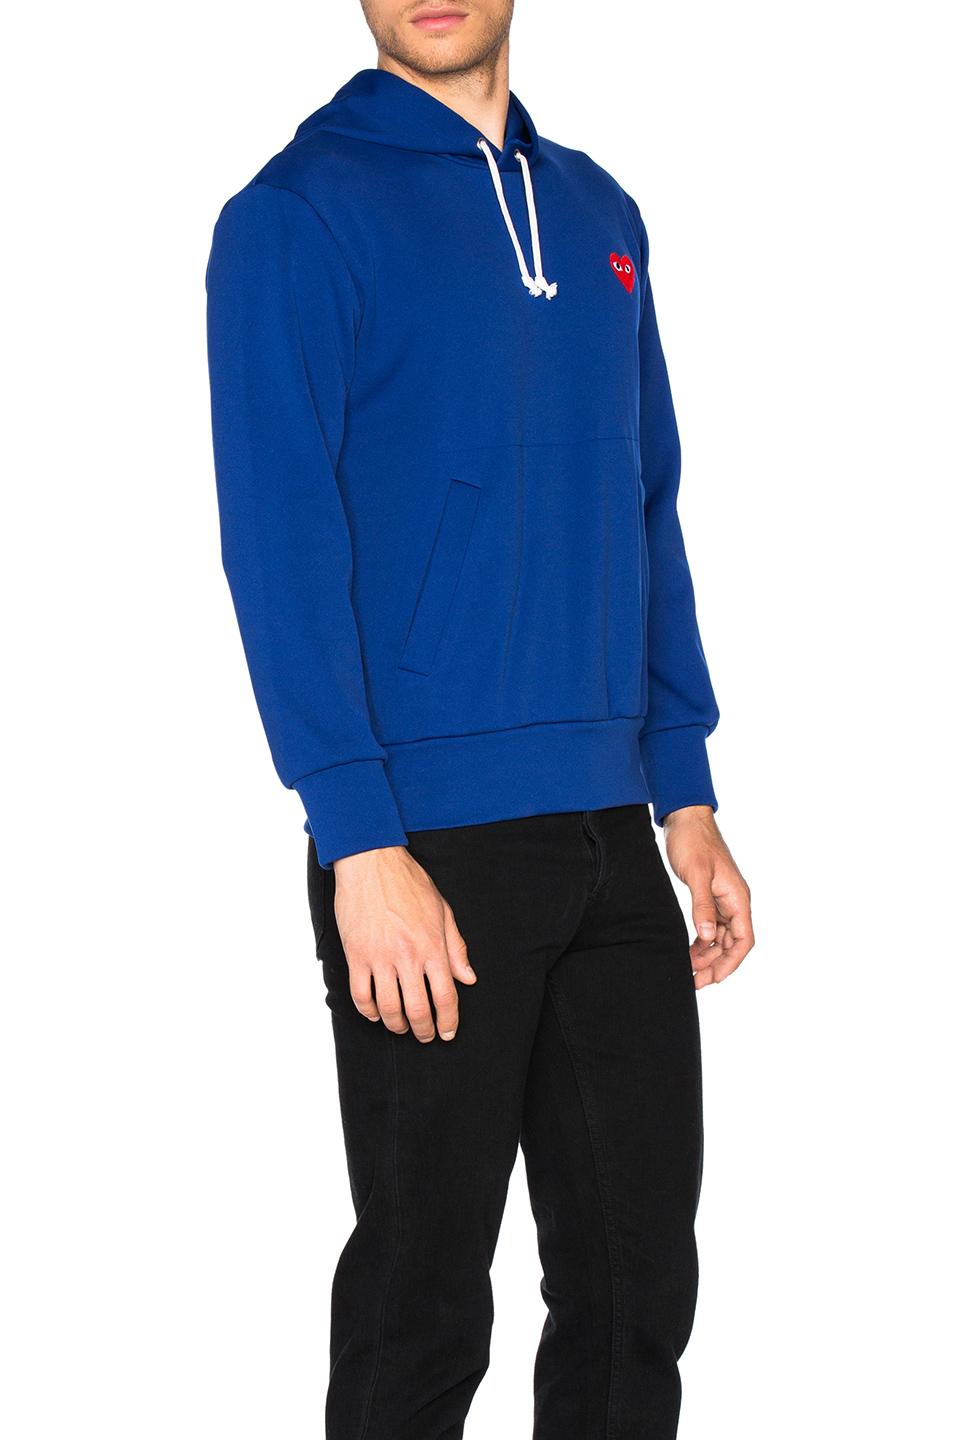 COMME DES GARÇONS PLAY Red Emblem Poly Hoodie in Navy (Blue) for Men - Lyst